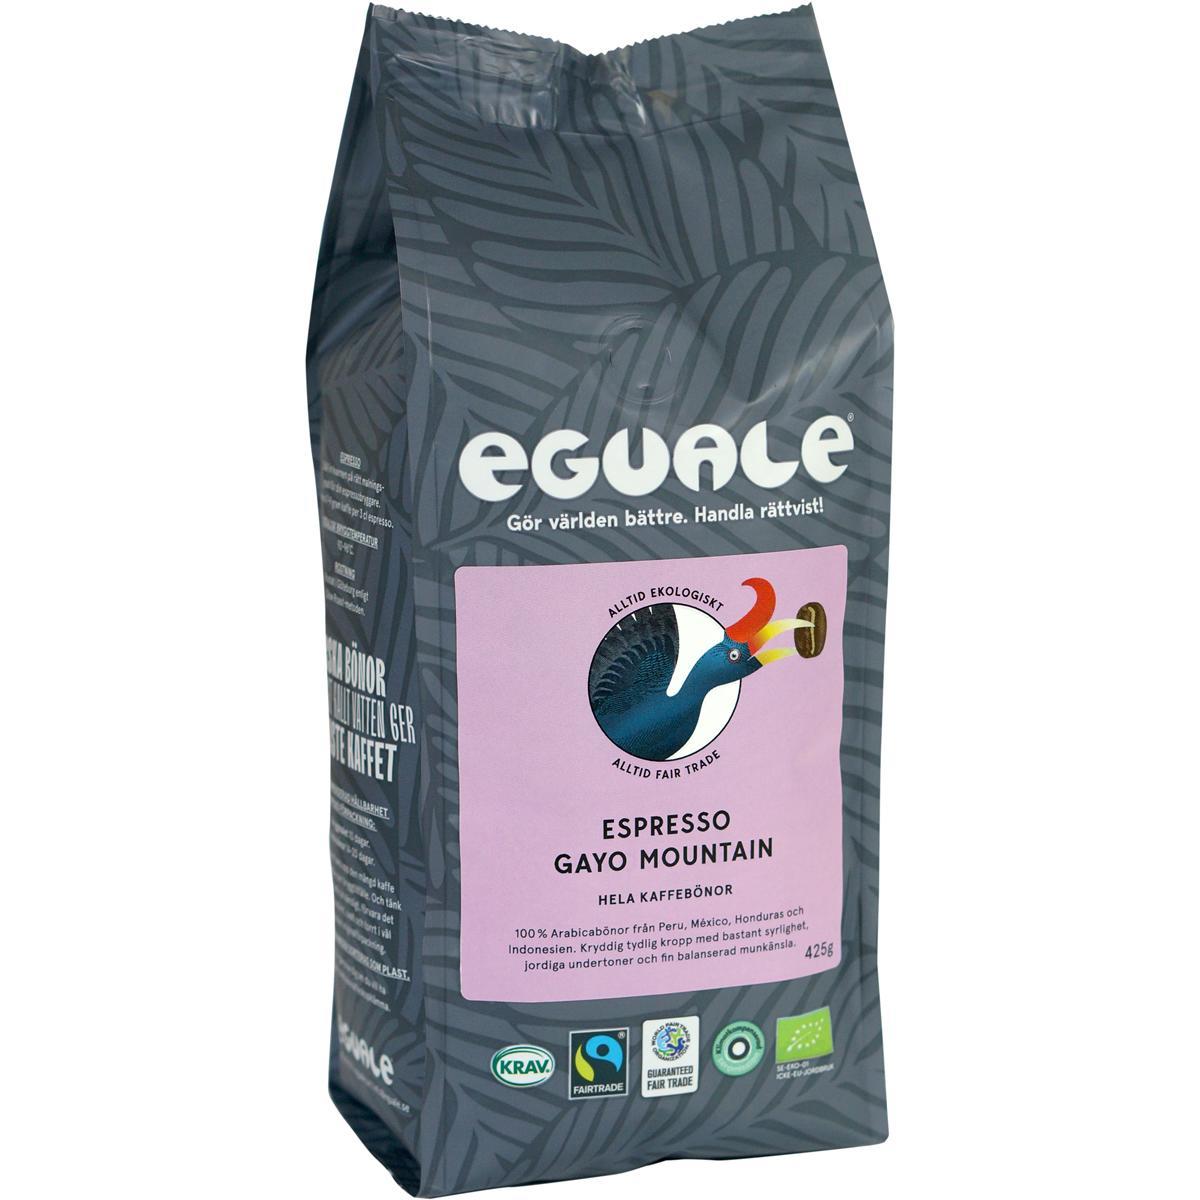 Eguale's Eguale Gayo Mountain, espresso'